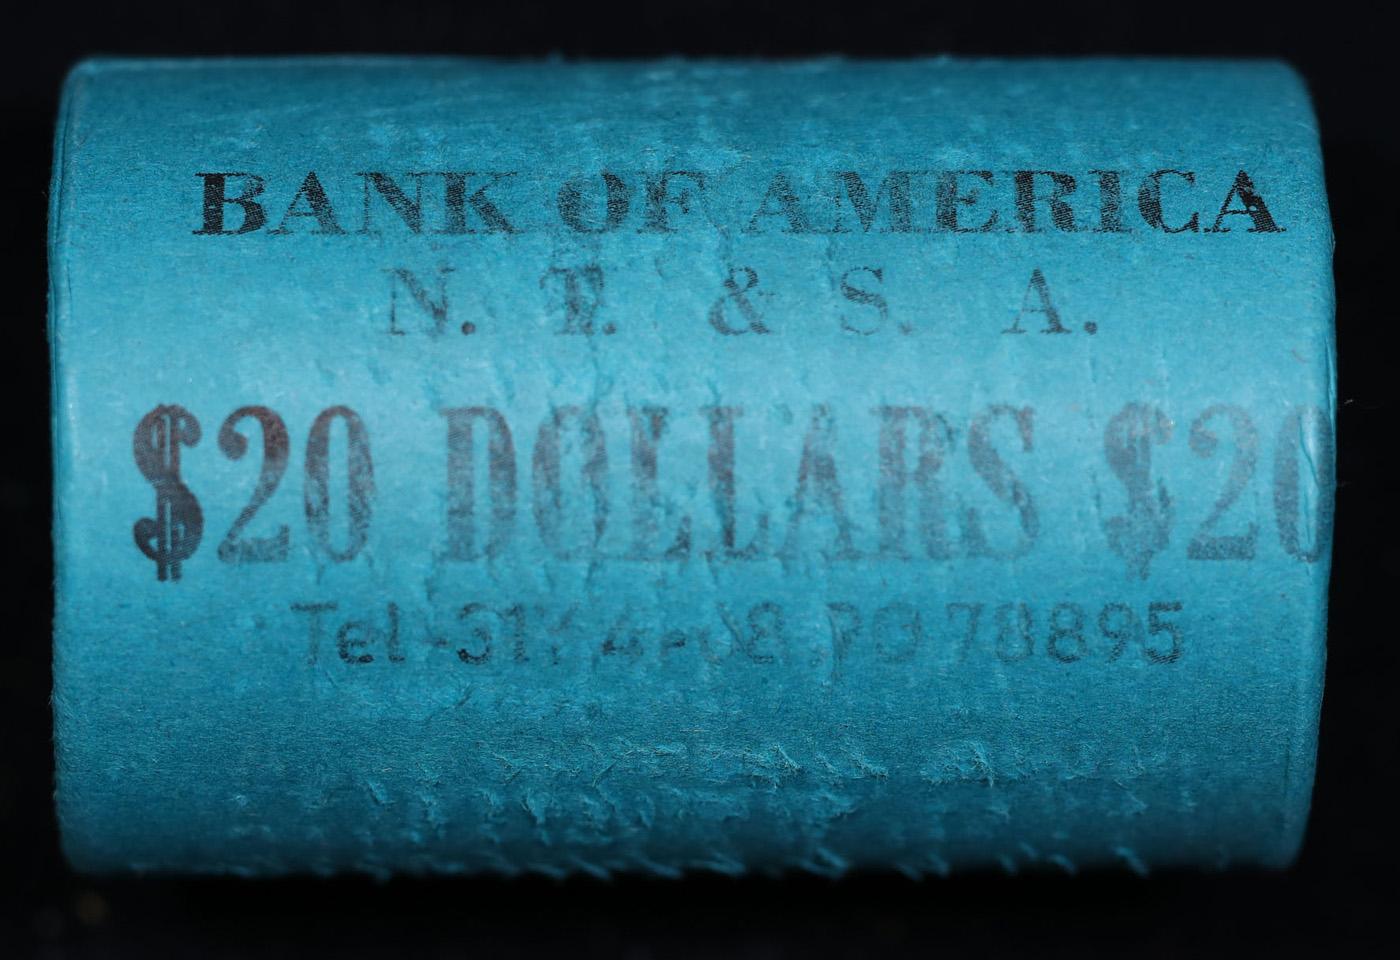 ***Auction Highlight*** Bank Of America 1882 & 'D' Ends Mixed Morgan/Peace Silver dollar roll, 20 co